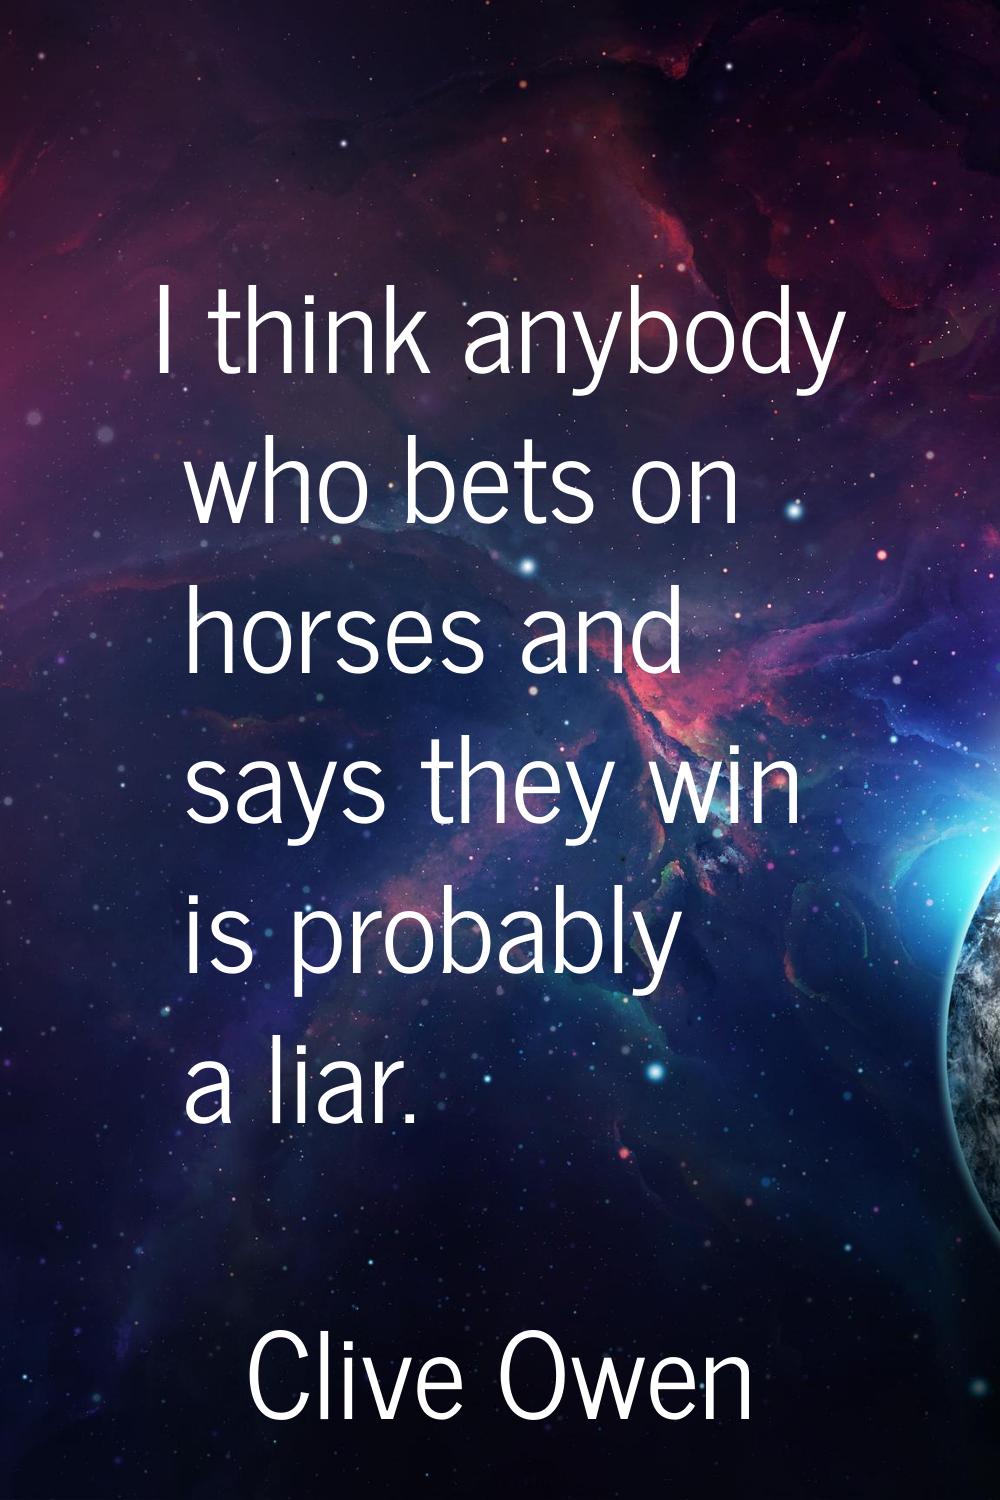 I think anybody who bets on horses and says they win is probably a liar.